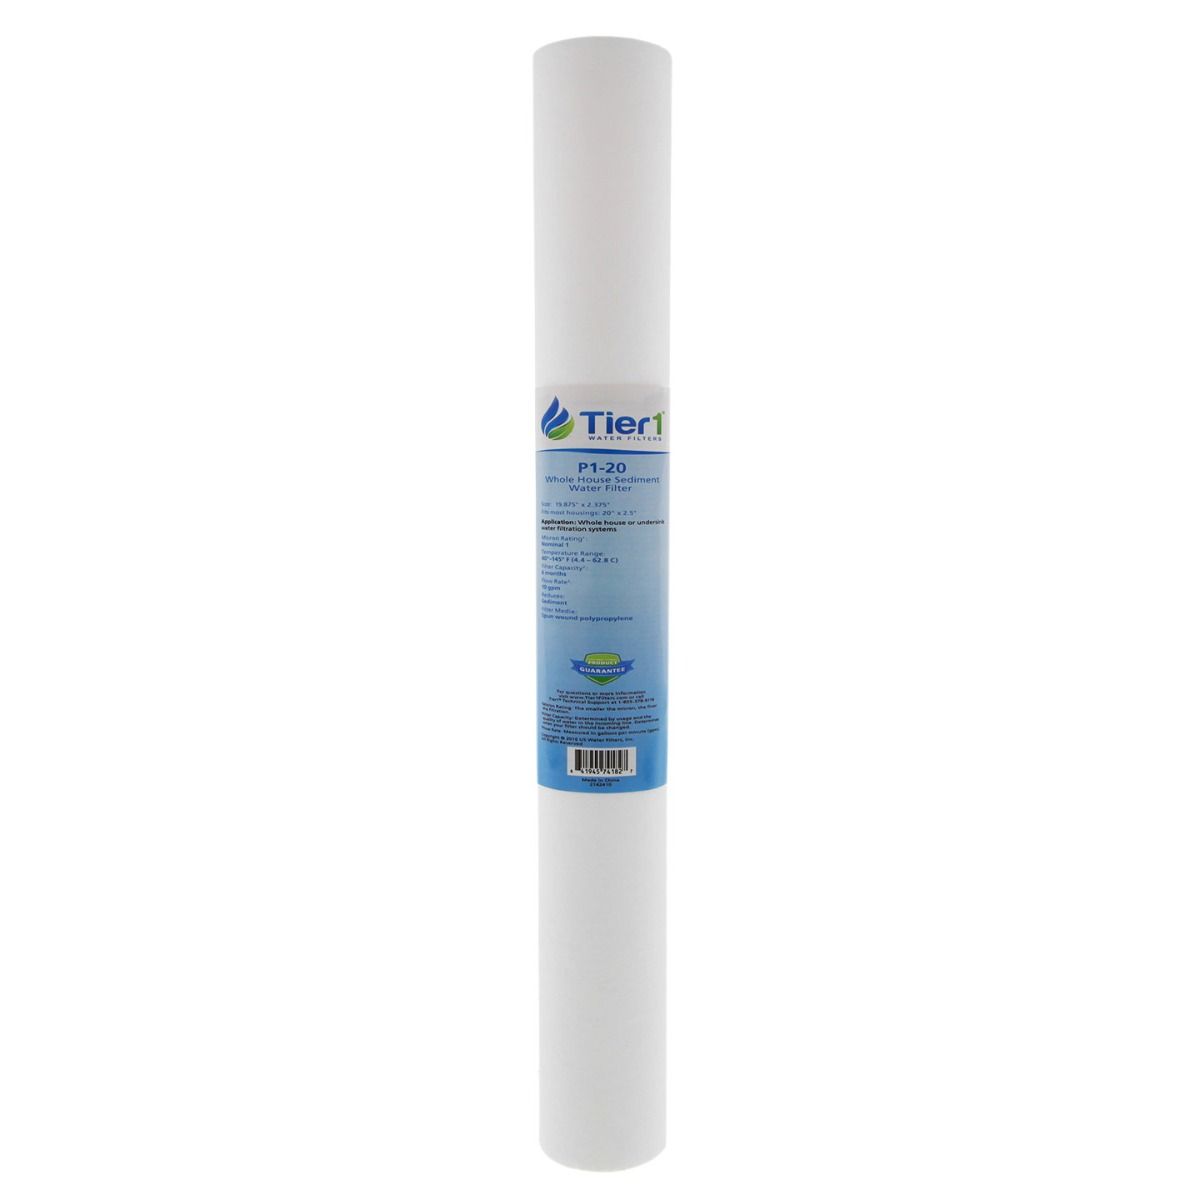 20 X 2.5 Spun Wound Polypropylene Replacement Filter by Tier1 (1 micron) (With Label)